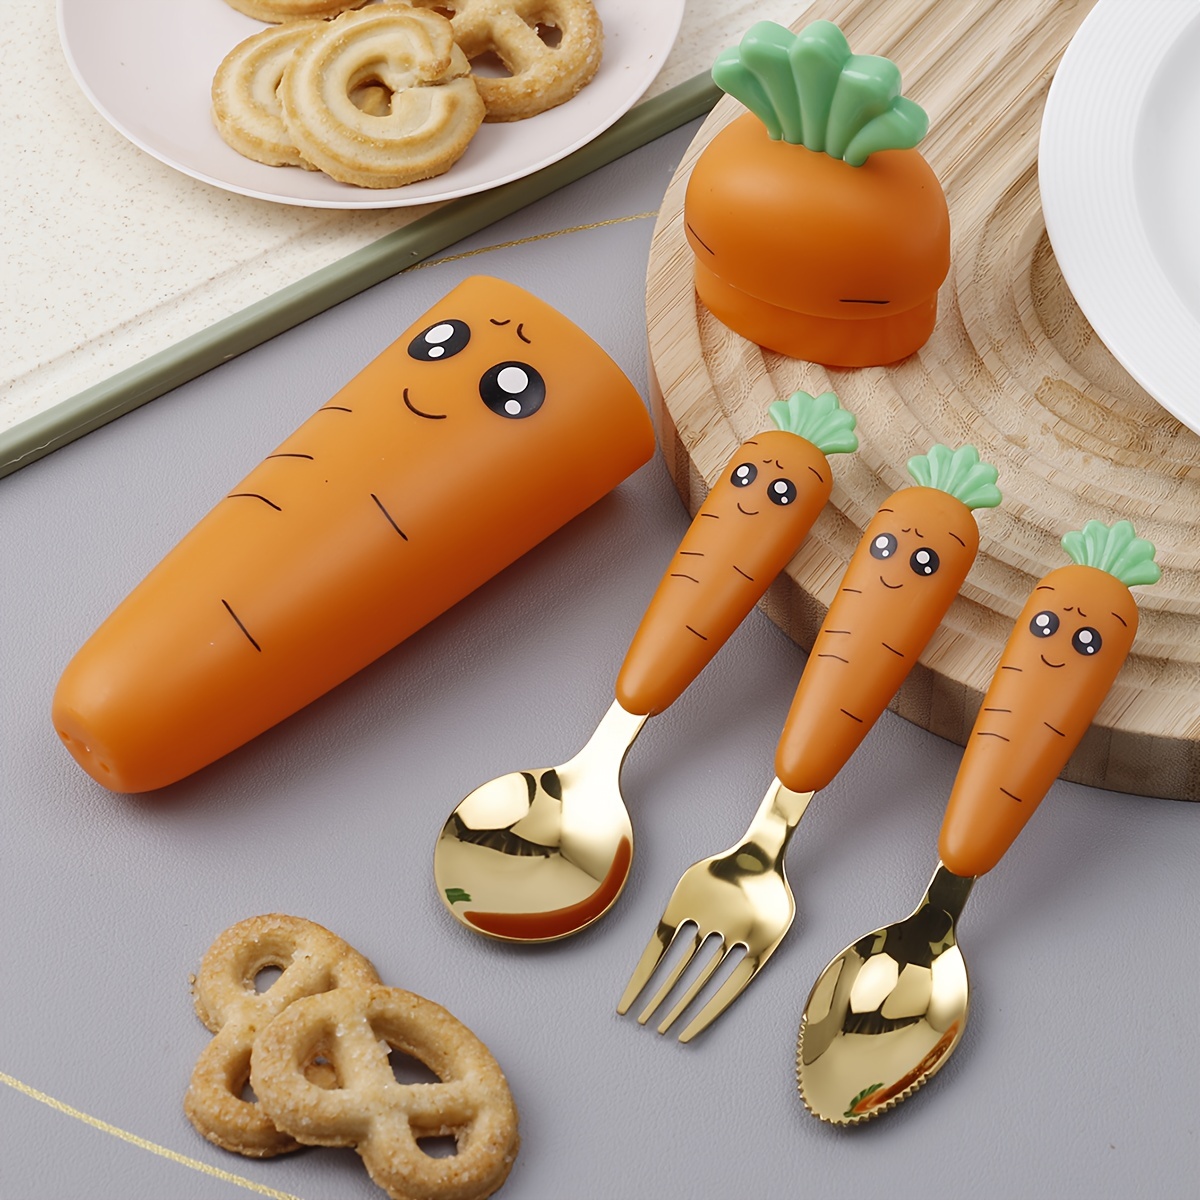 

4pcs Carrot Shape Travel Utensil Sets For Lunch, 304 Stainless Steel Camping Cutlery Set With Cute Carrot Shape & Storage Box, Reusable Flatware